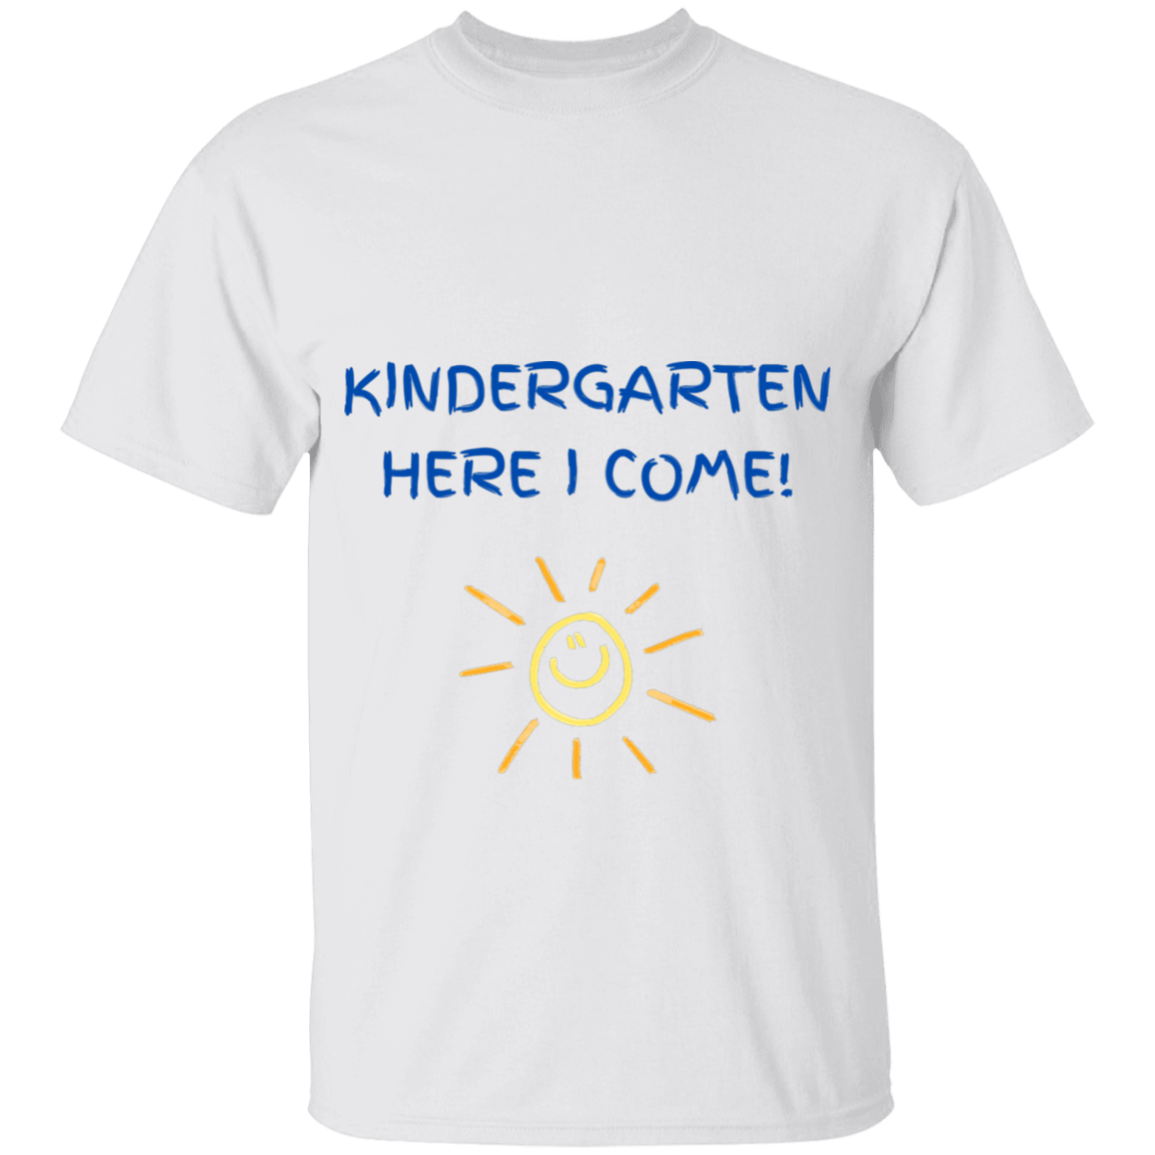 Get trendy with KINDERGARTEN HERE I Come! - T-Shirts available at Good Gift Company. Grab yours for $20.42 today!